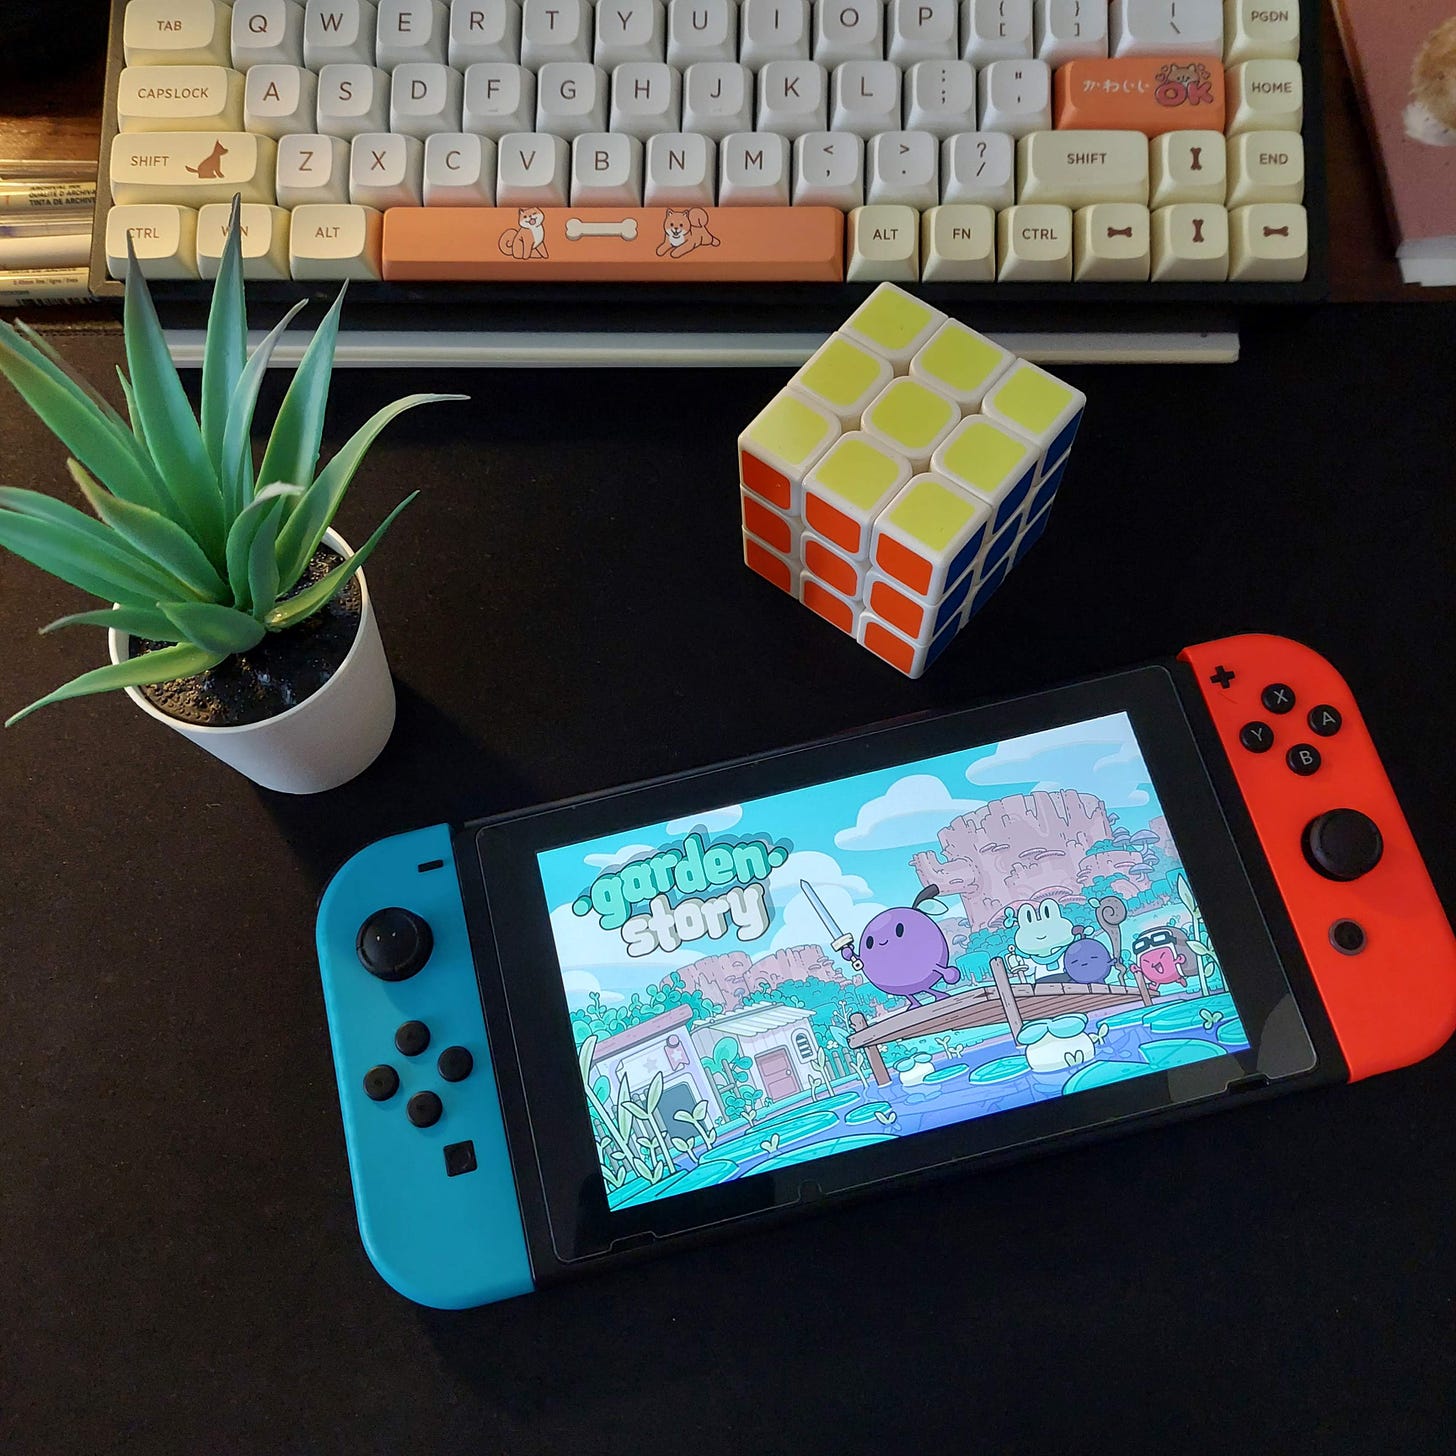 The Switch is a great console for playing cozy games